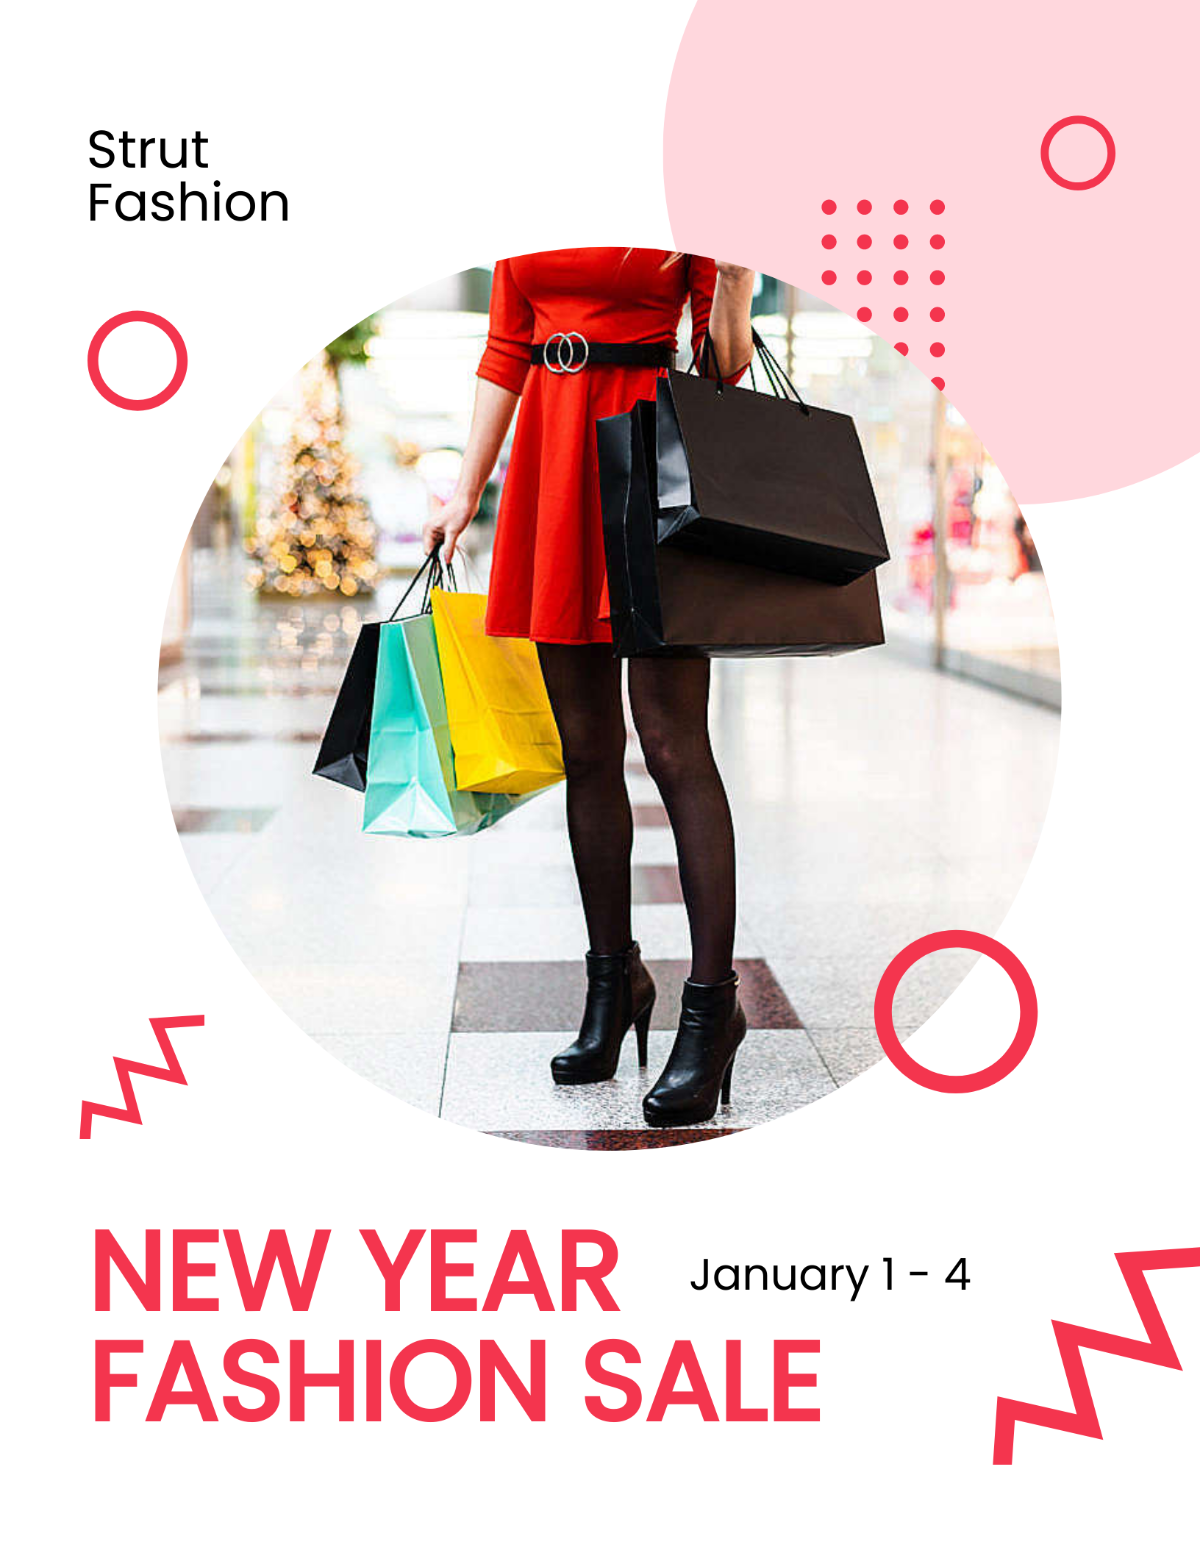 New Year Fashion Sale Promotion Flyer - Edit Online & Download Example